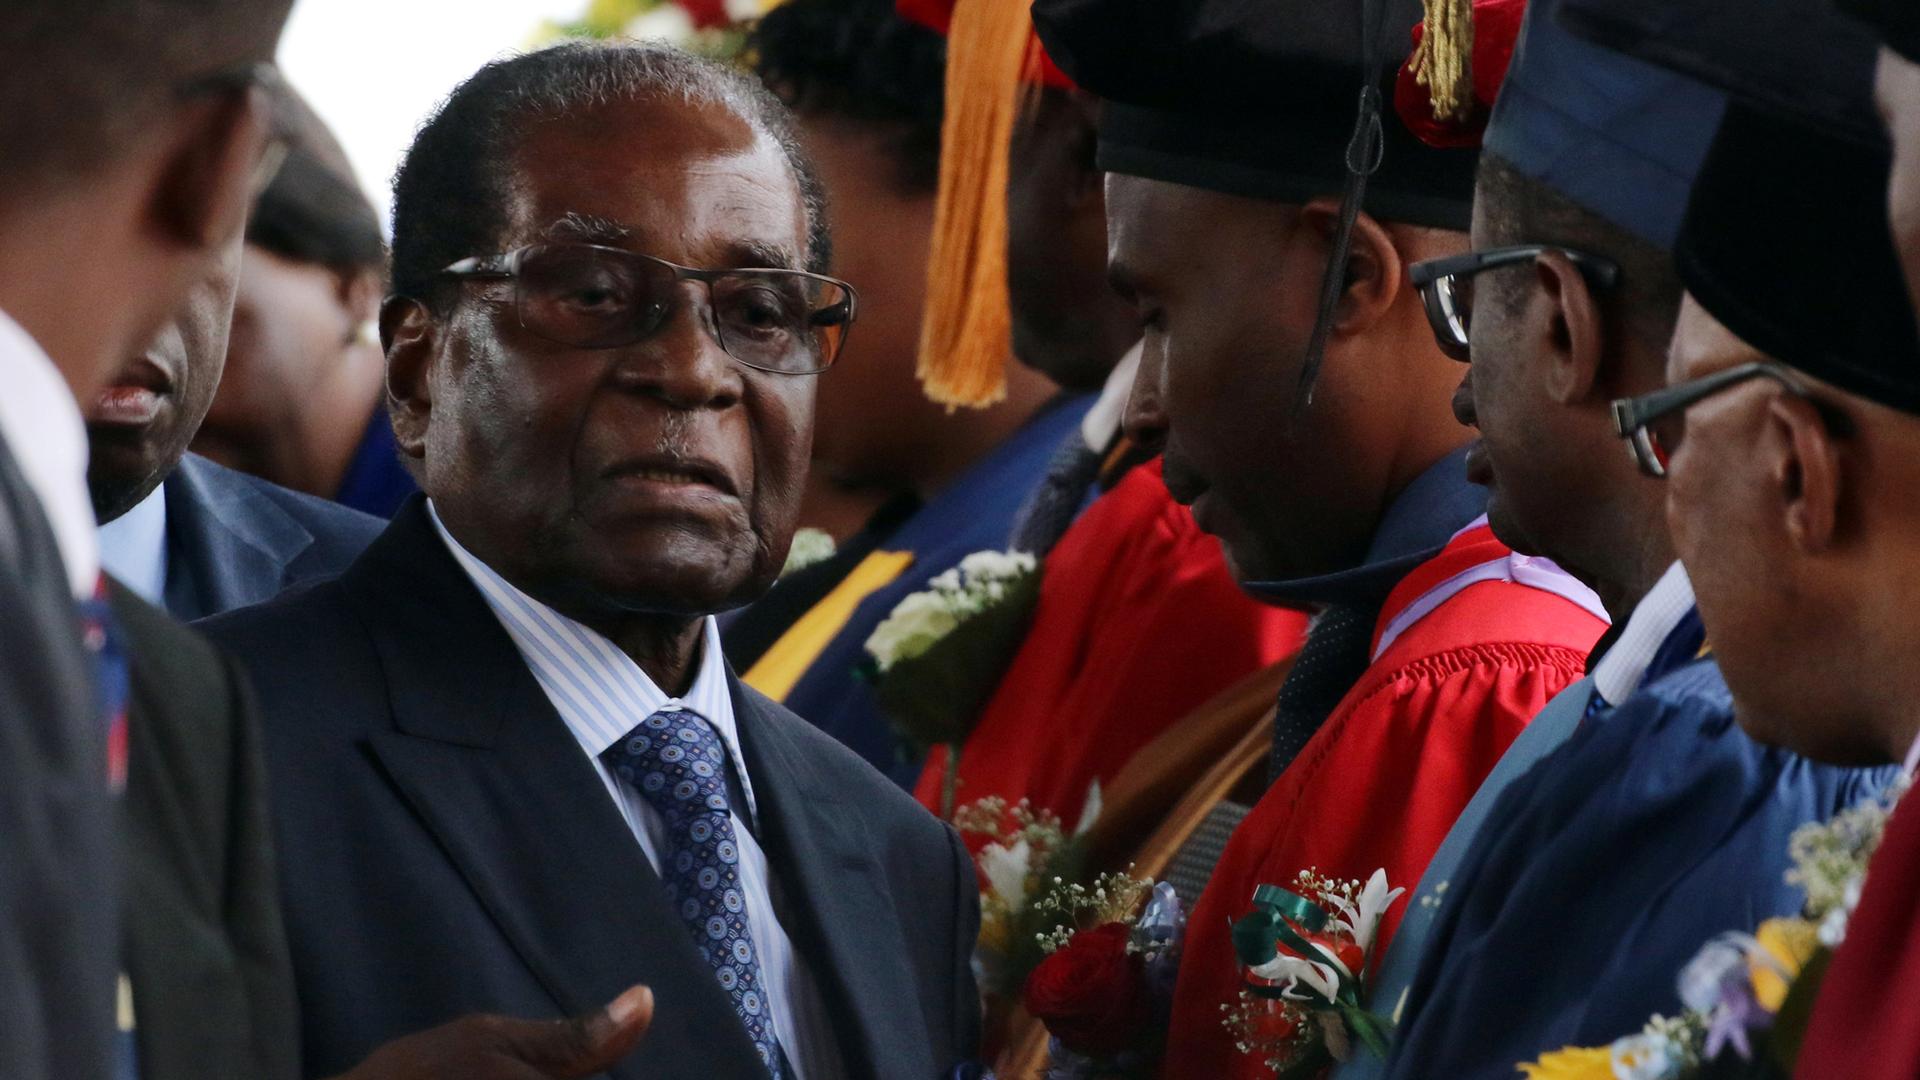 Zimbabwe President Robert Mugabe stands center with a blue suit and tie shaking the hands of college graduates.